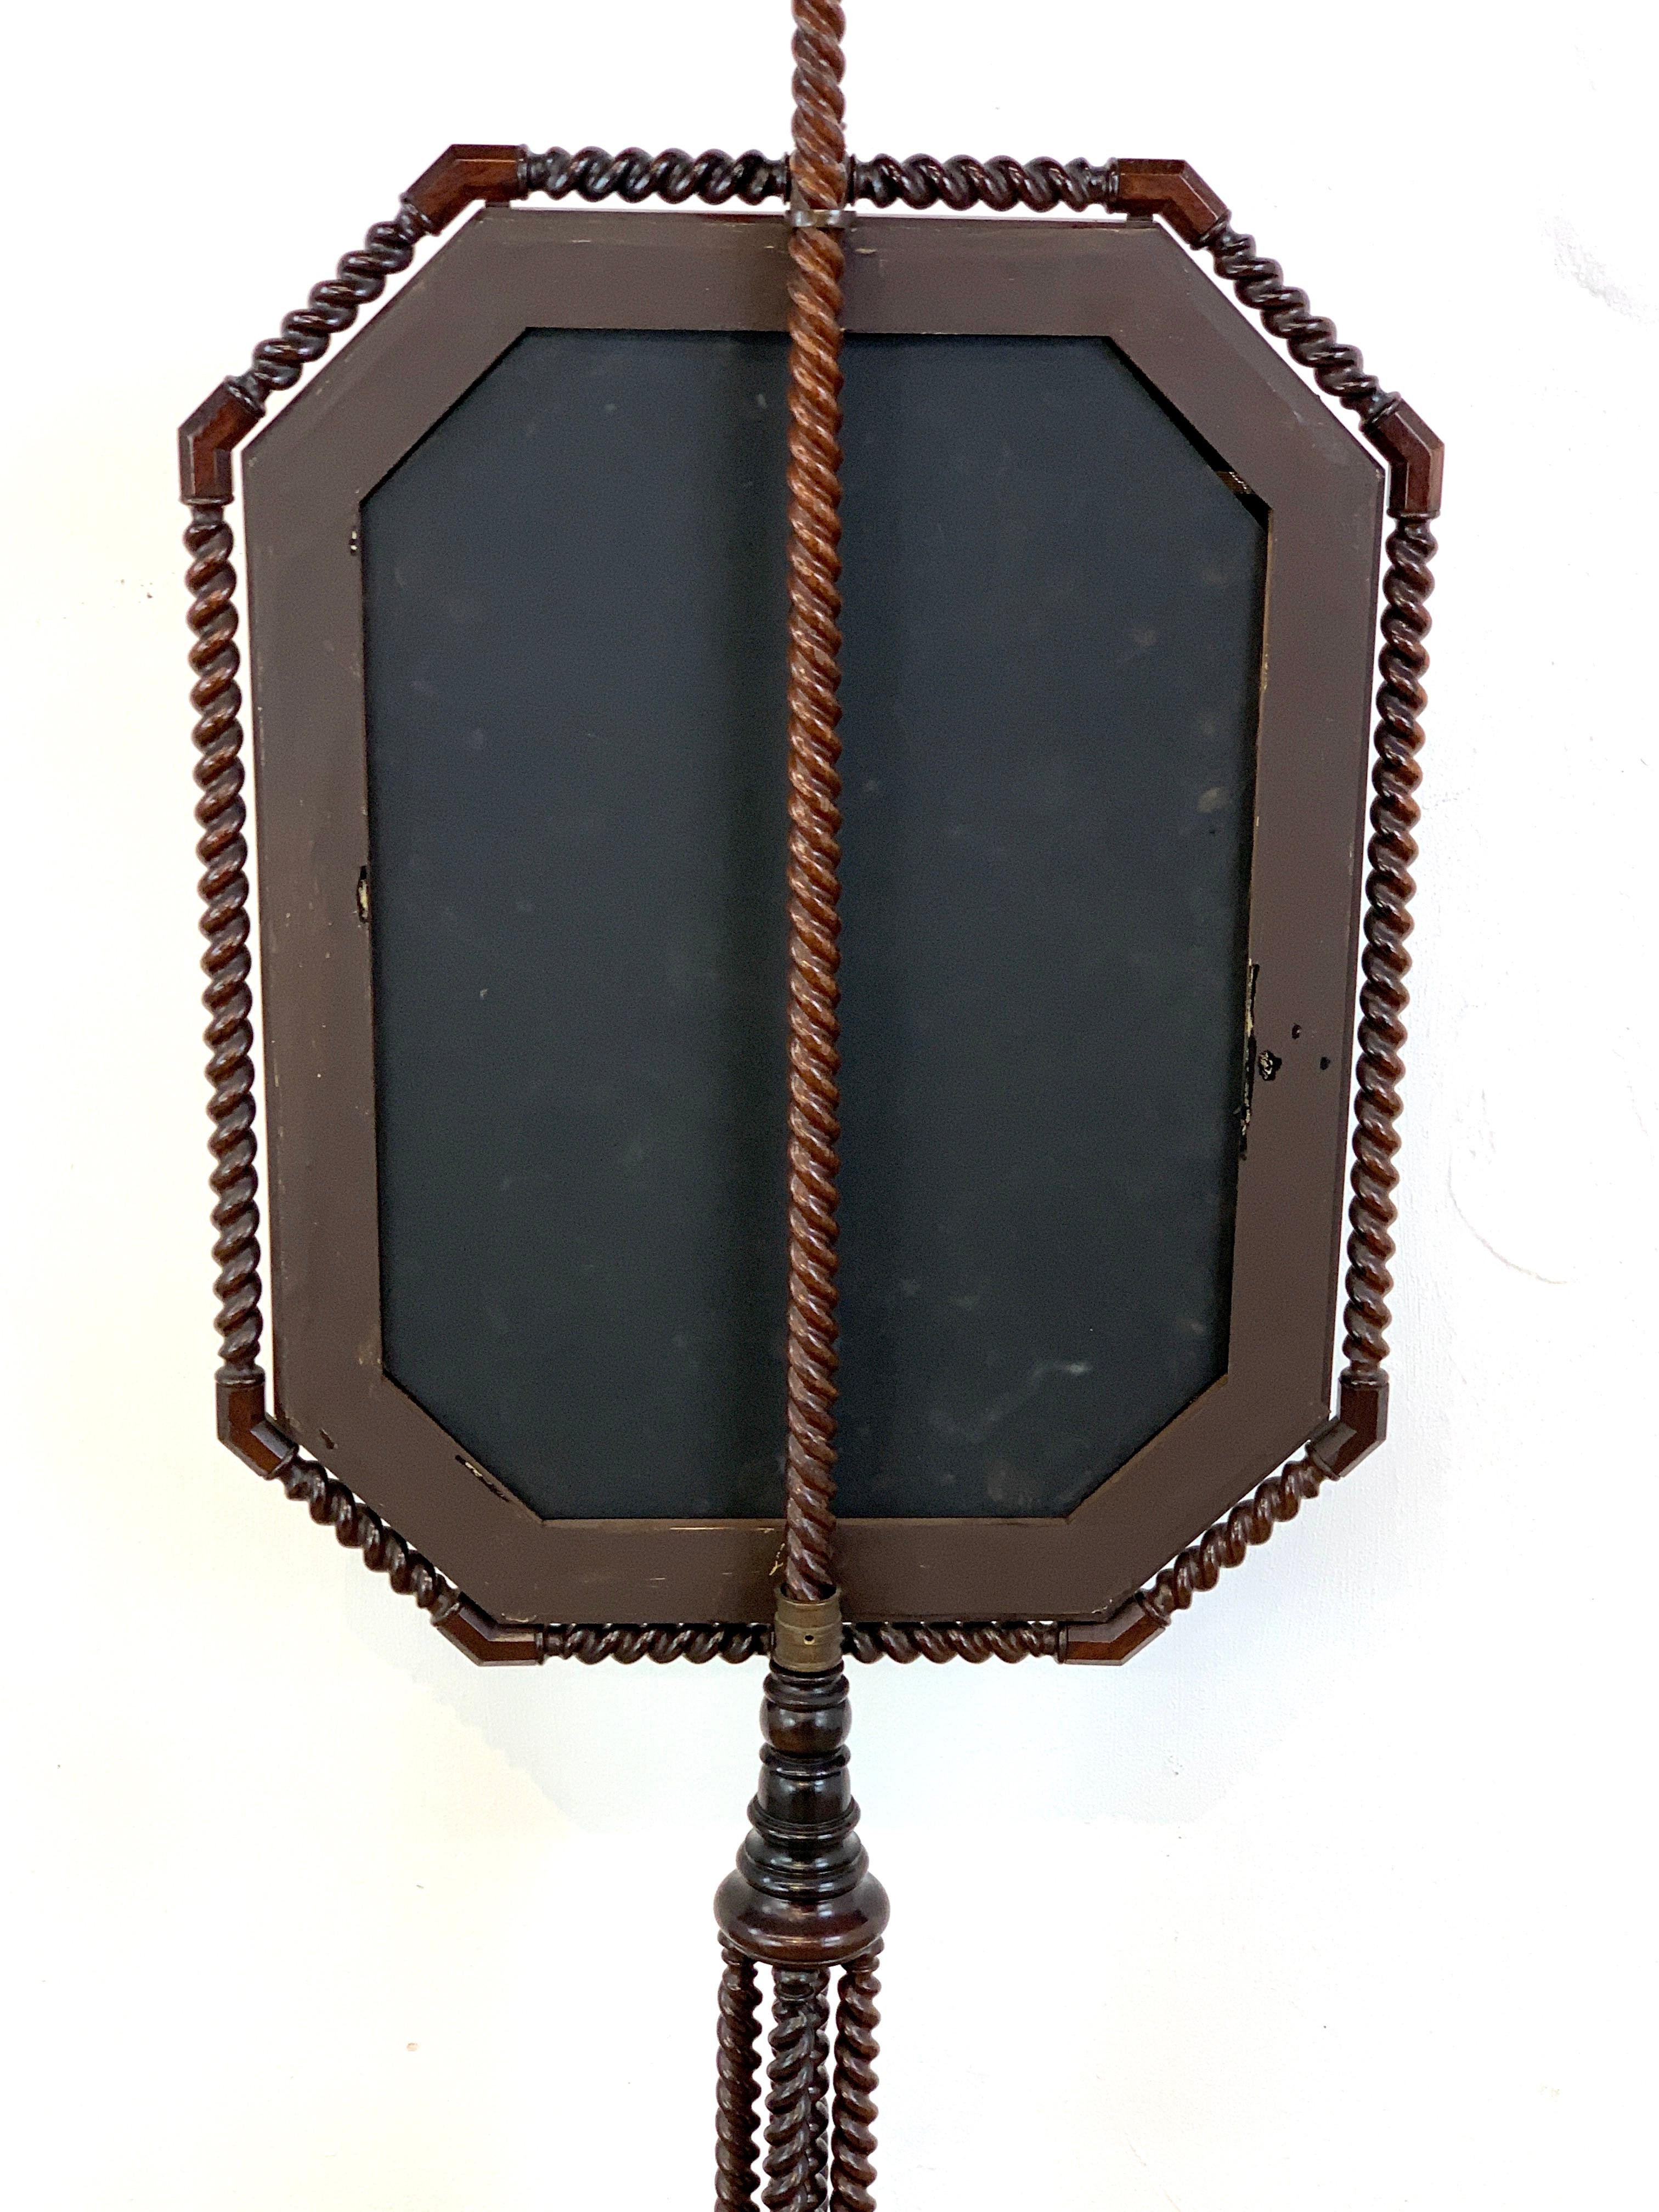 Exquisite 19th Century Rosewood & Needlepoint Cockatoo in Landscape Firescreen For Sale 3